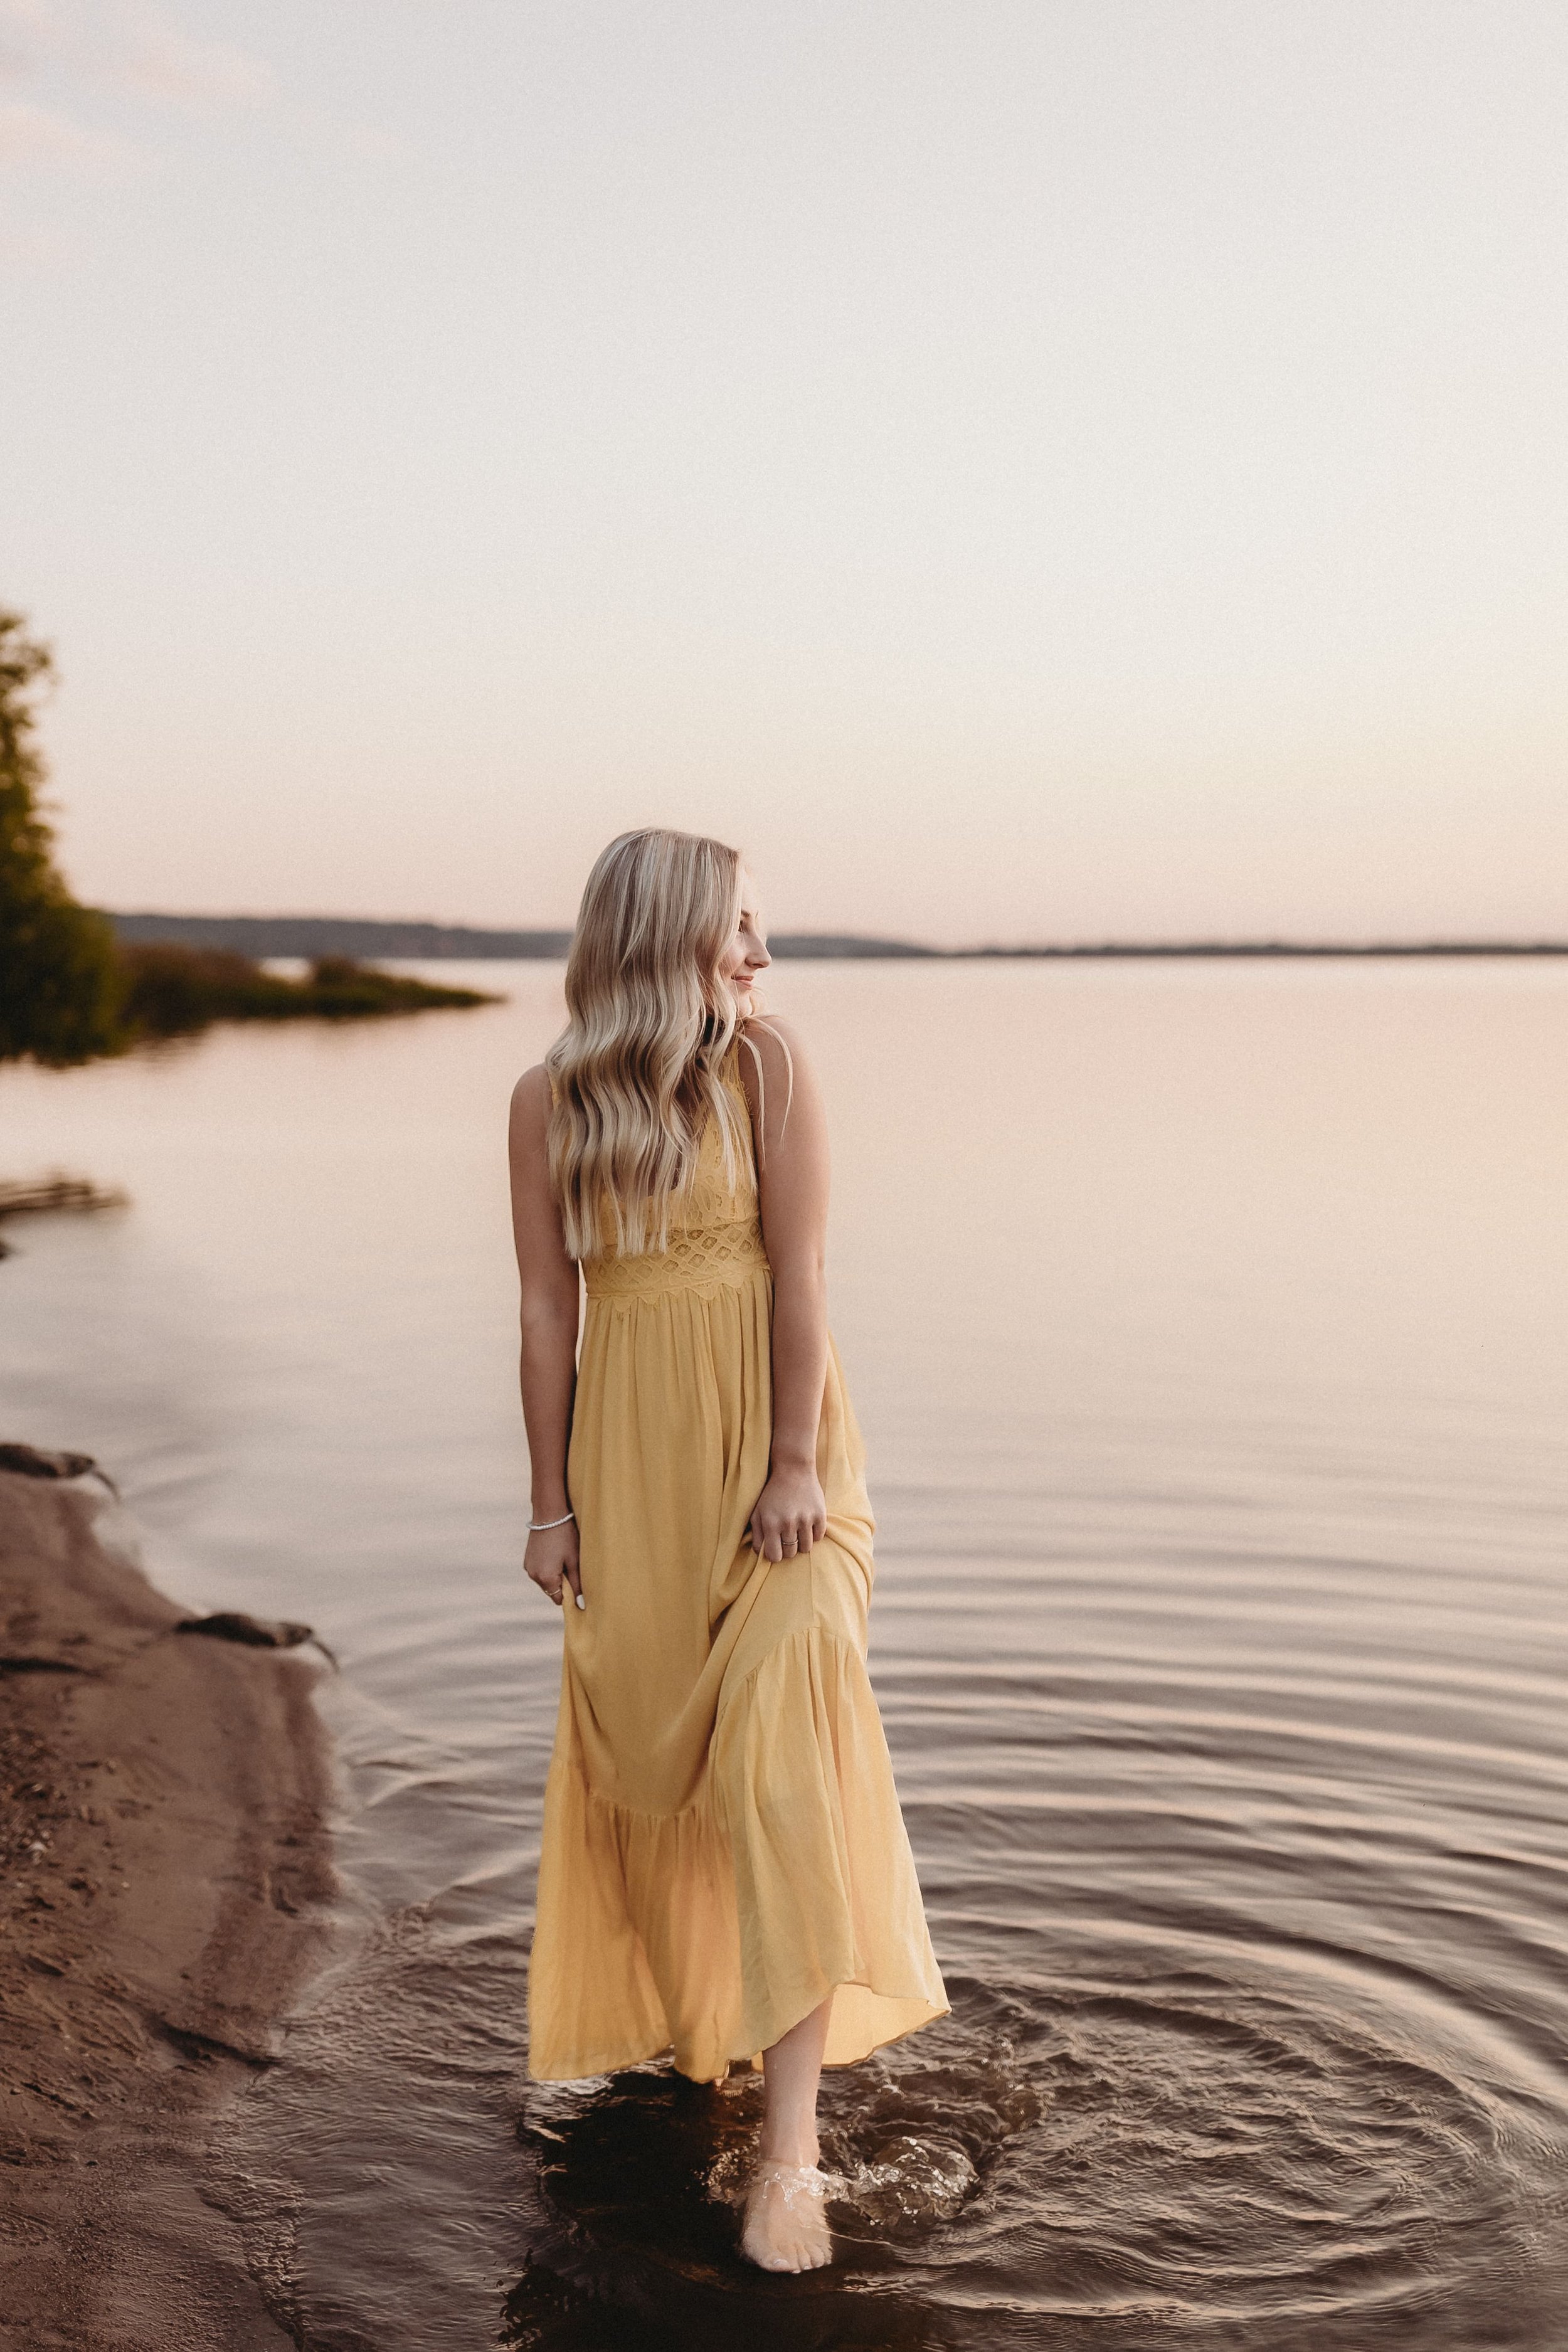  for her senior photo shoot, parker stands barefoot in the illinois river while wearing a long yellow dress 